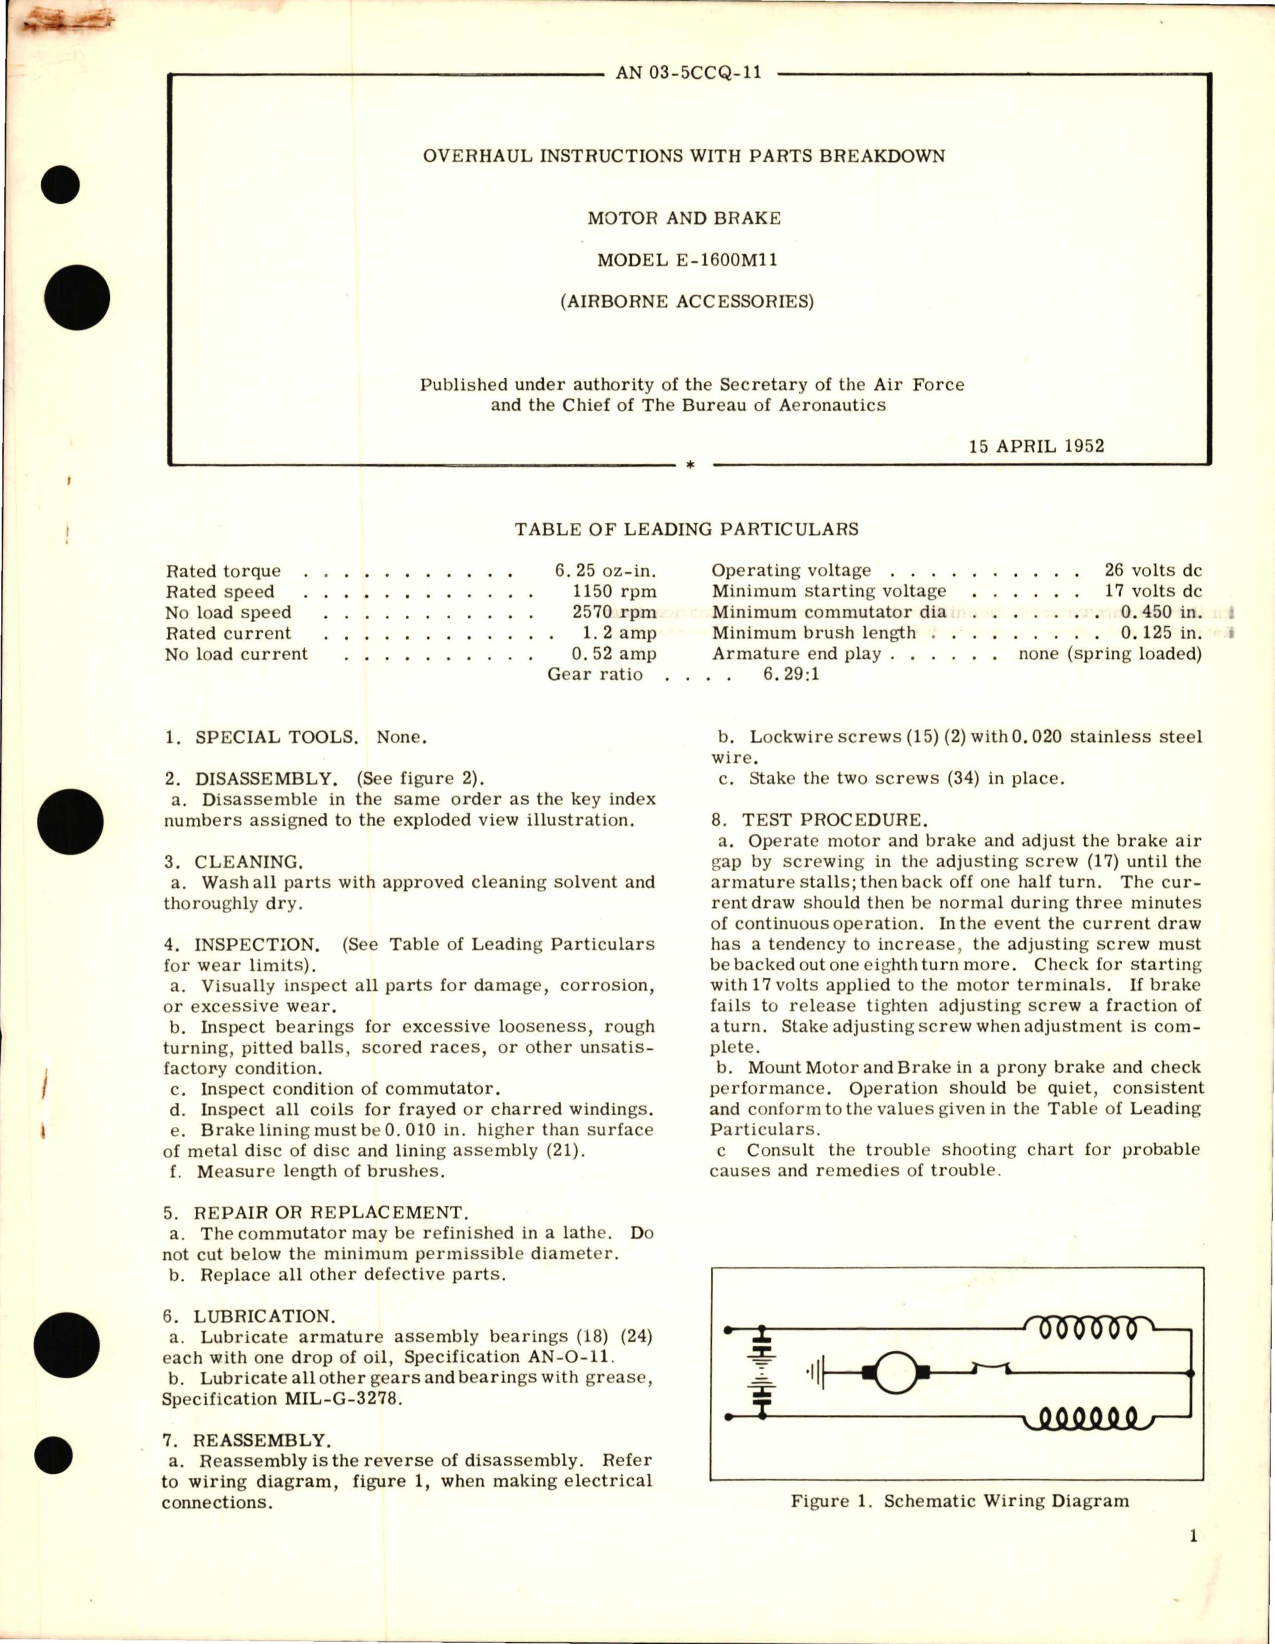 Sample page 1 from AirCorps Library document: Overhaul Instructions with Parts Breakdown for Motor and Brake - Model E-1600M11